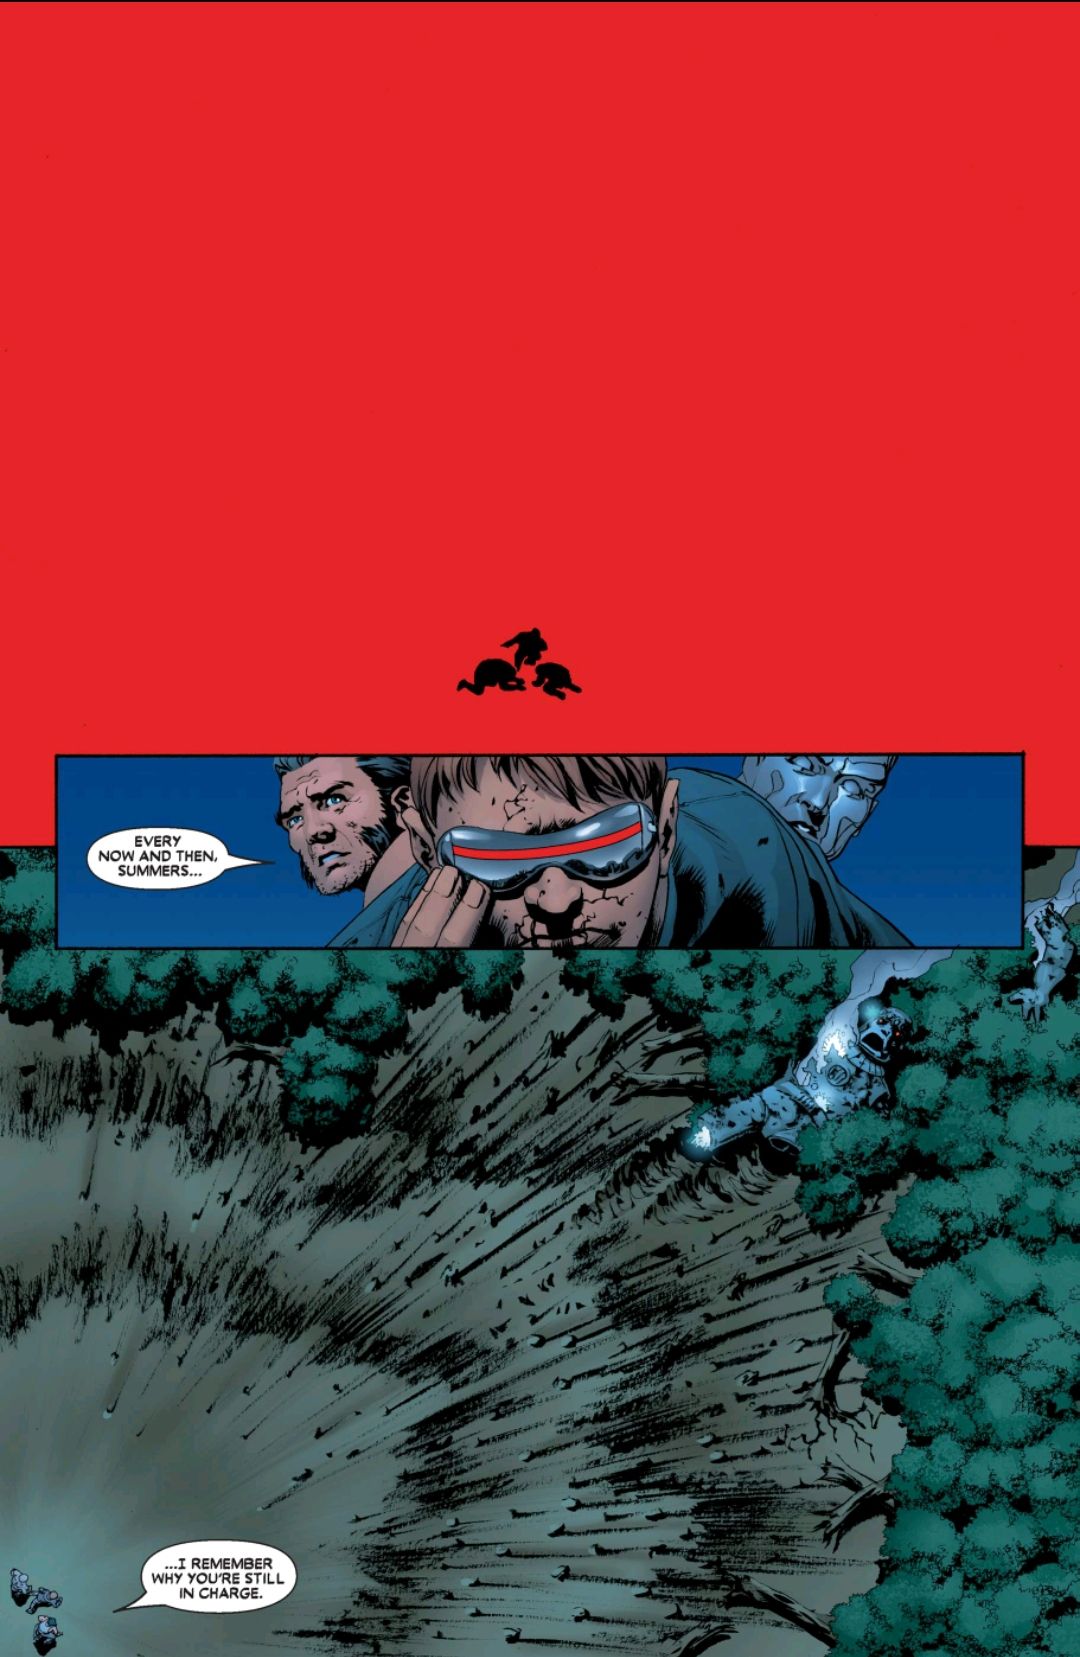 Cyclops destroying a sentinel is depicted only as a full panel of red. “Every now and then, Summers,” Wolverine says, in awe, “I remember why you’re still in charge.” Astonishing X-Men #8, Marvel Comics (2008). 